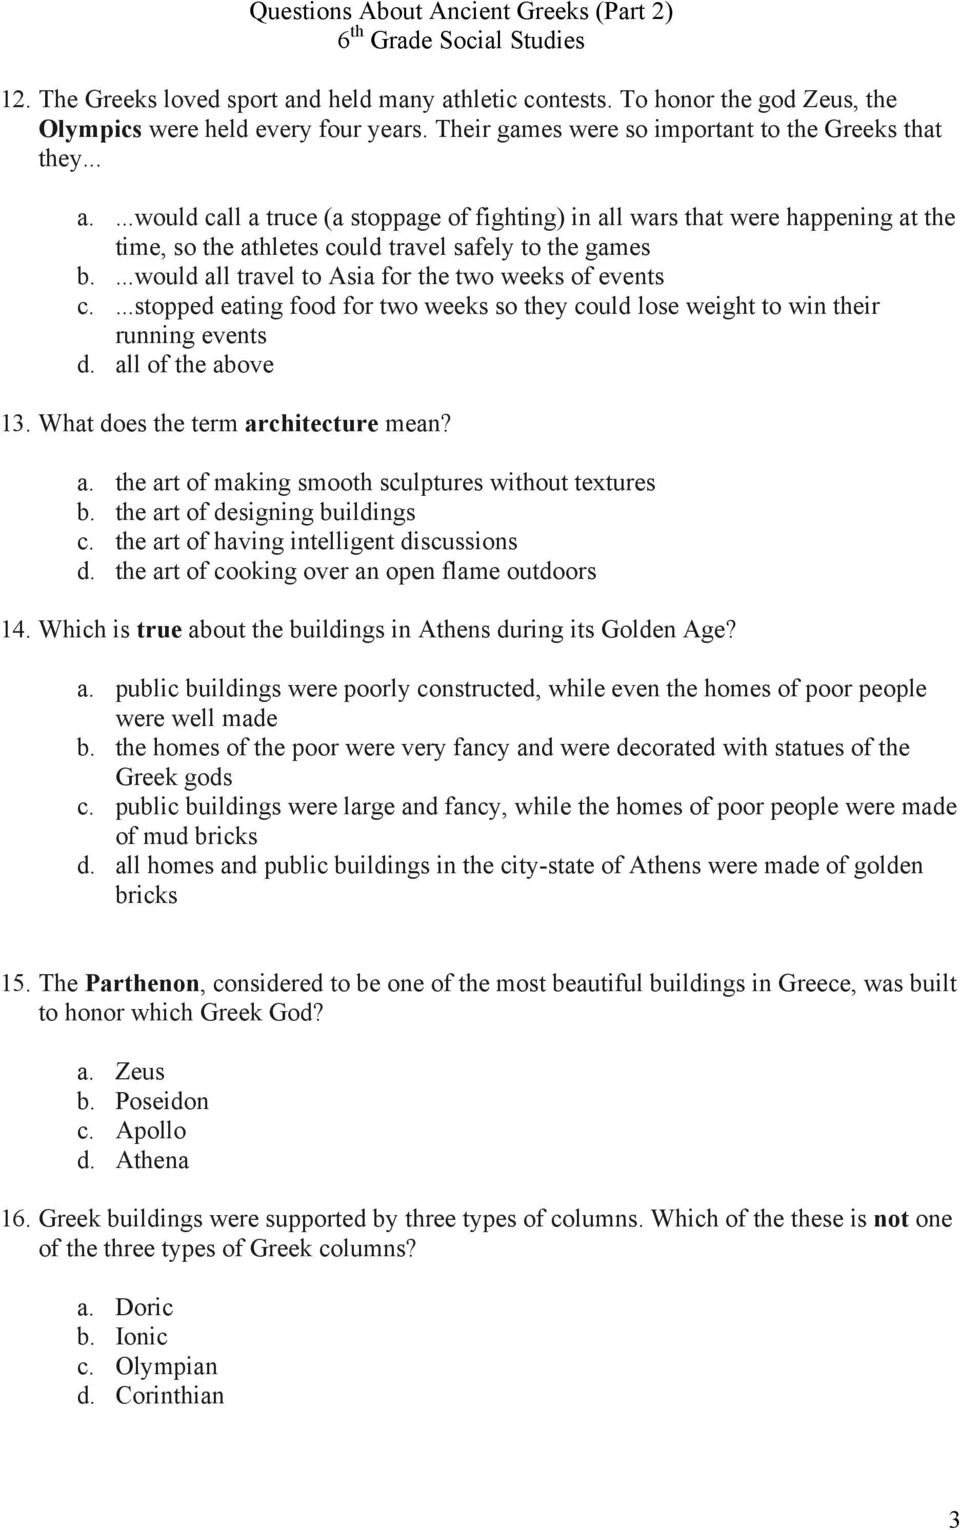 the art of designing buildings c. the art of having intelligent discussions d. the art of cooking over an open flame outdoors 14. Which is true about the buildings in Athens during its Golden Age? a. public buildings were poorly constructed, while even the homes of poor people were well made b.